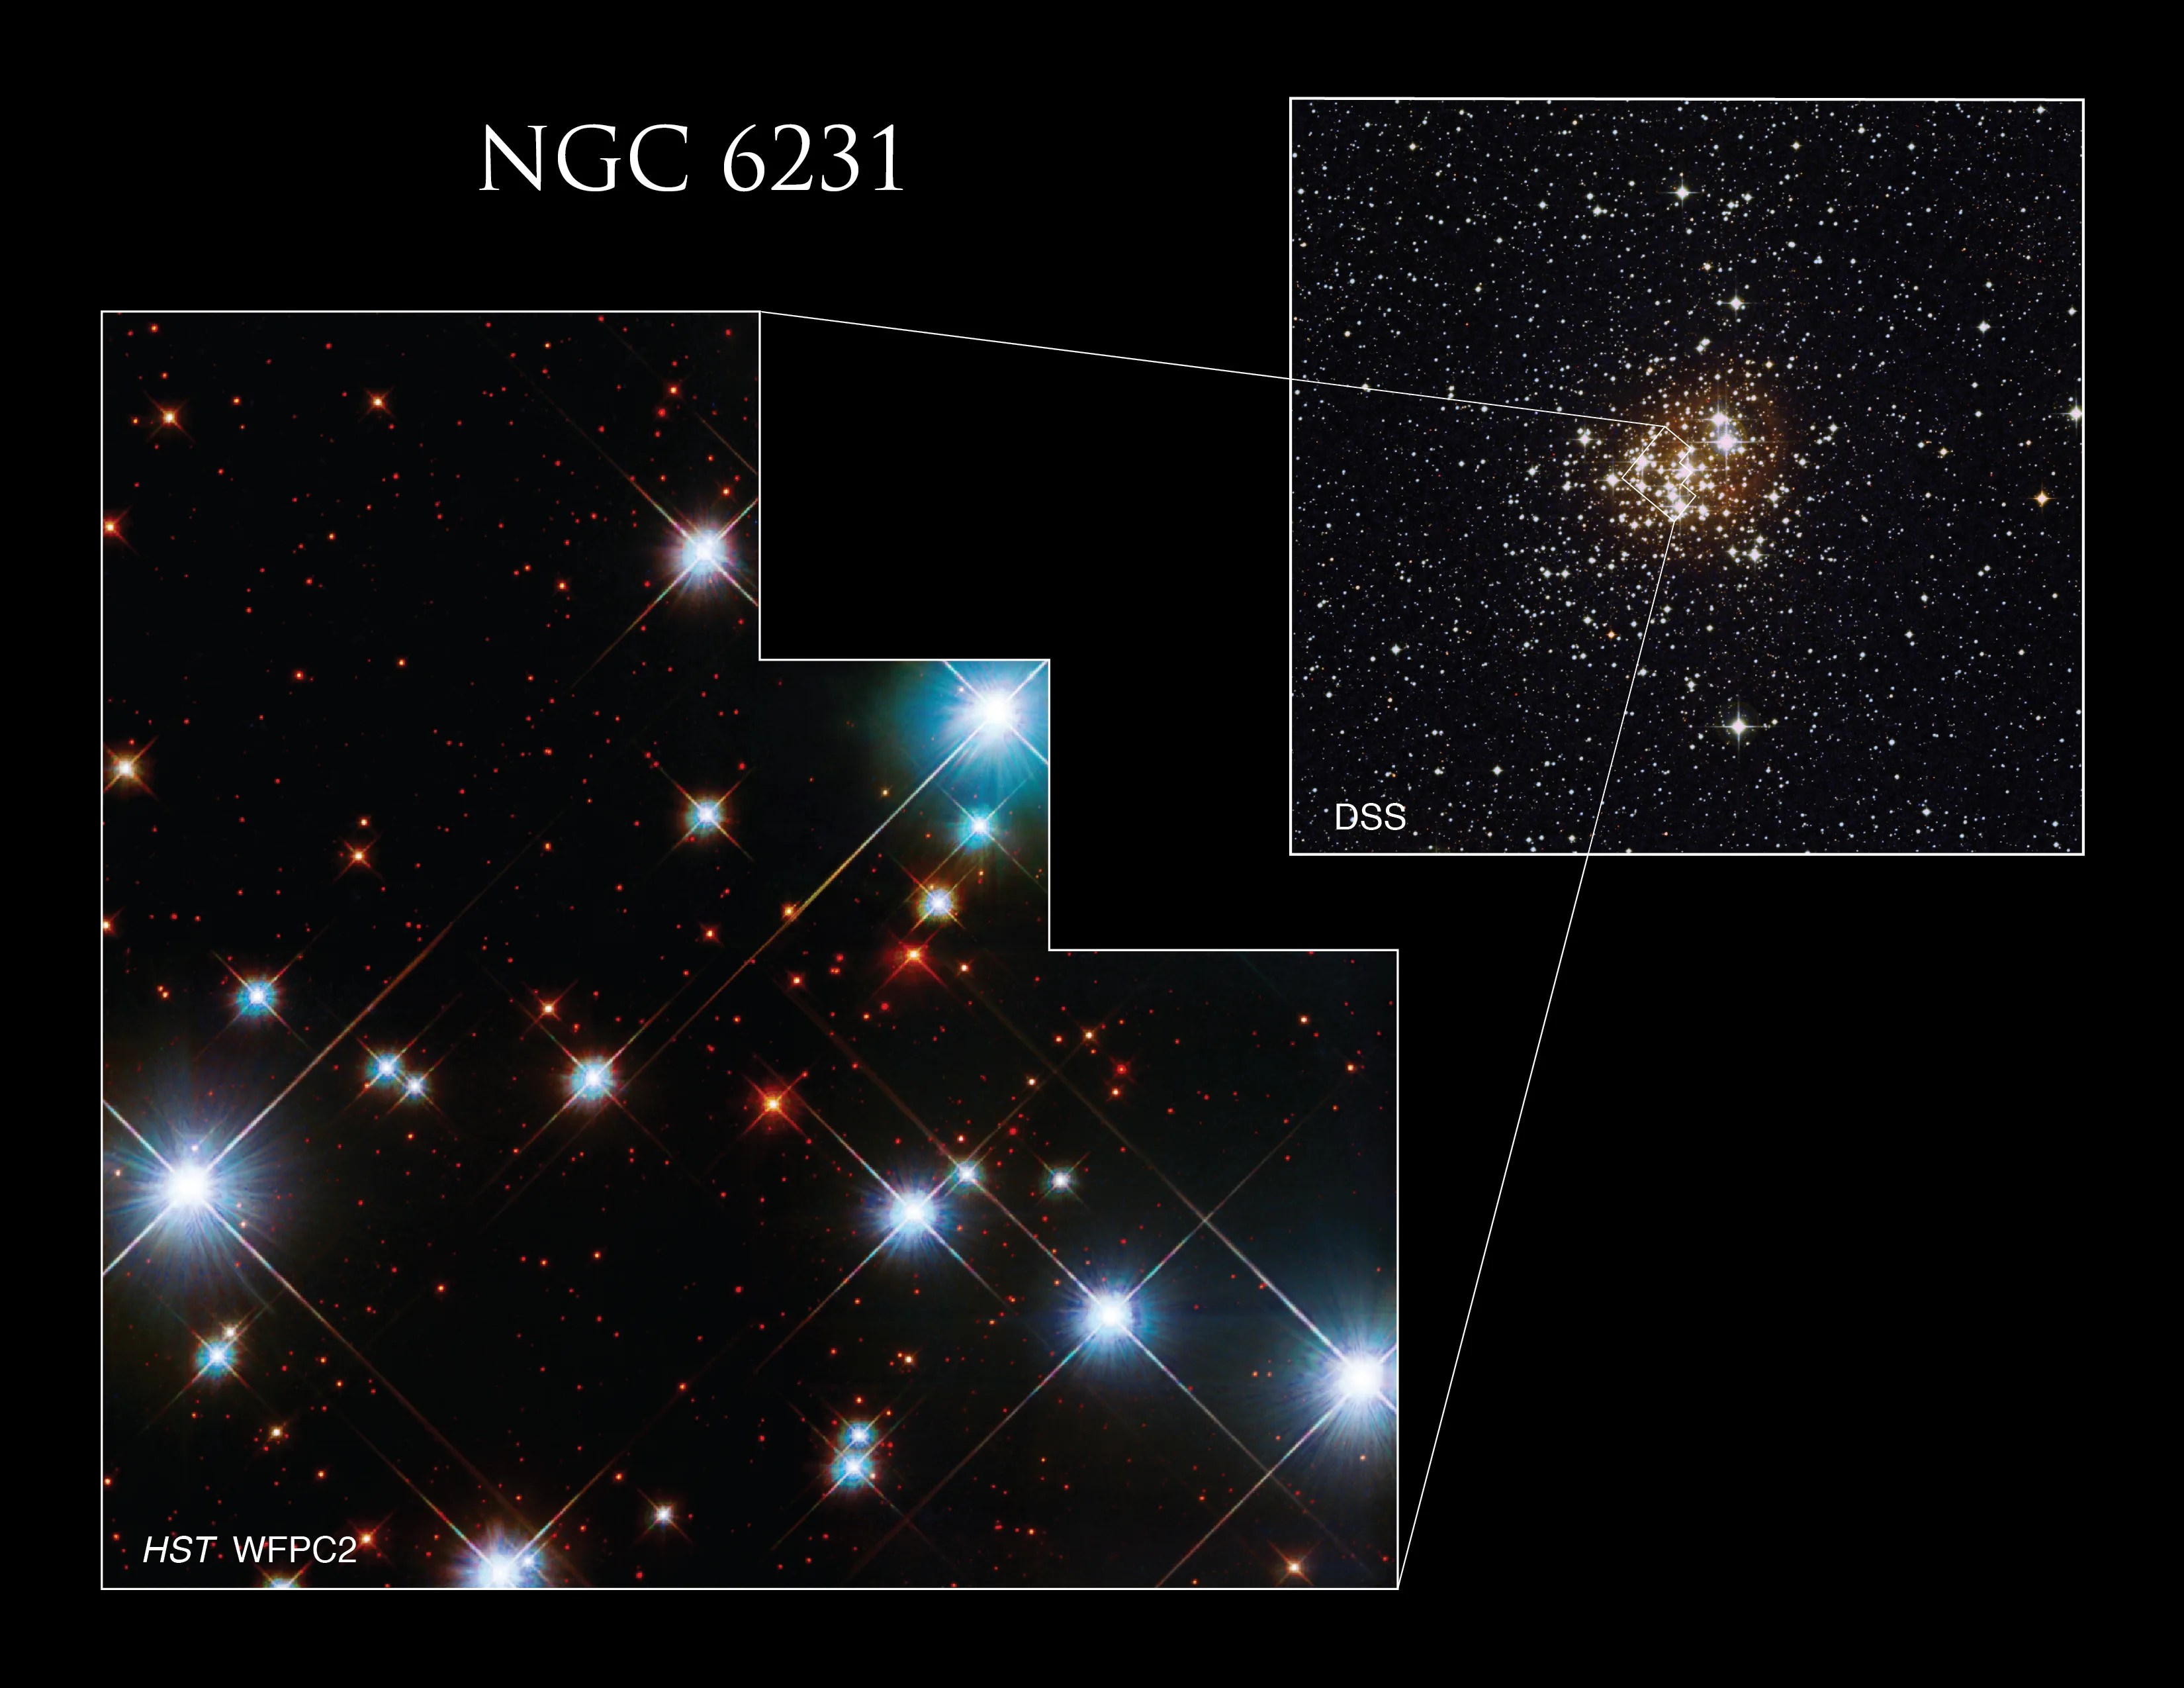 In the upper right is a ground-based image of Caldwell 76 (NGC 6231) from the Digitized Sky Survey (DSS).